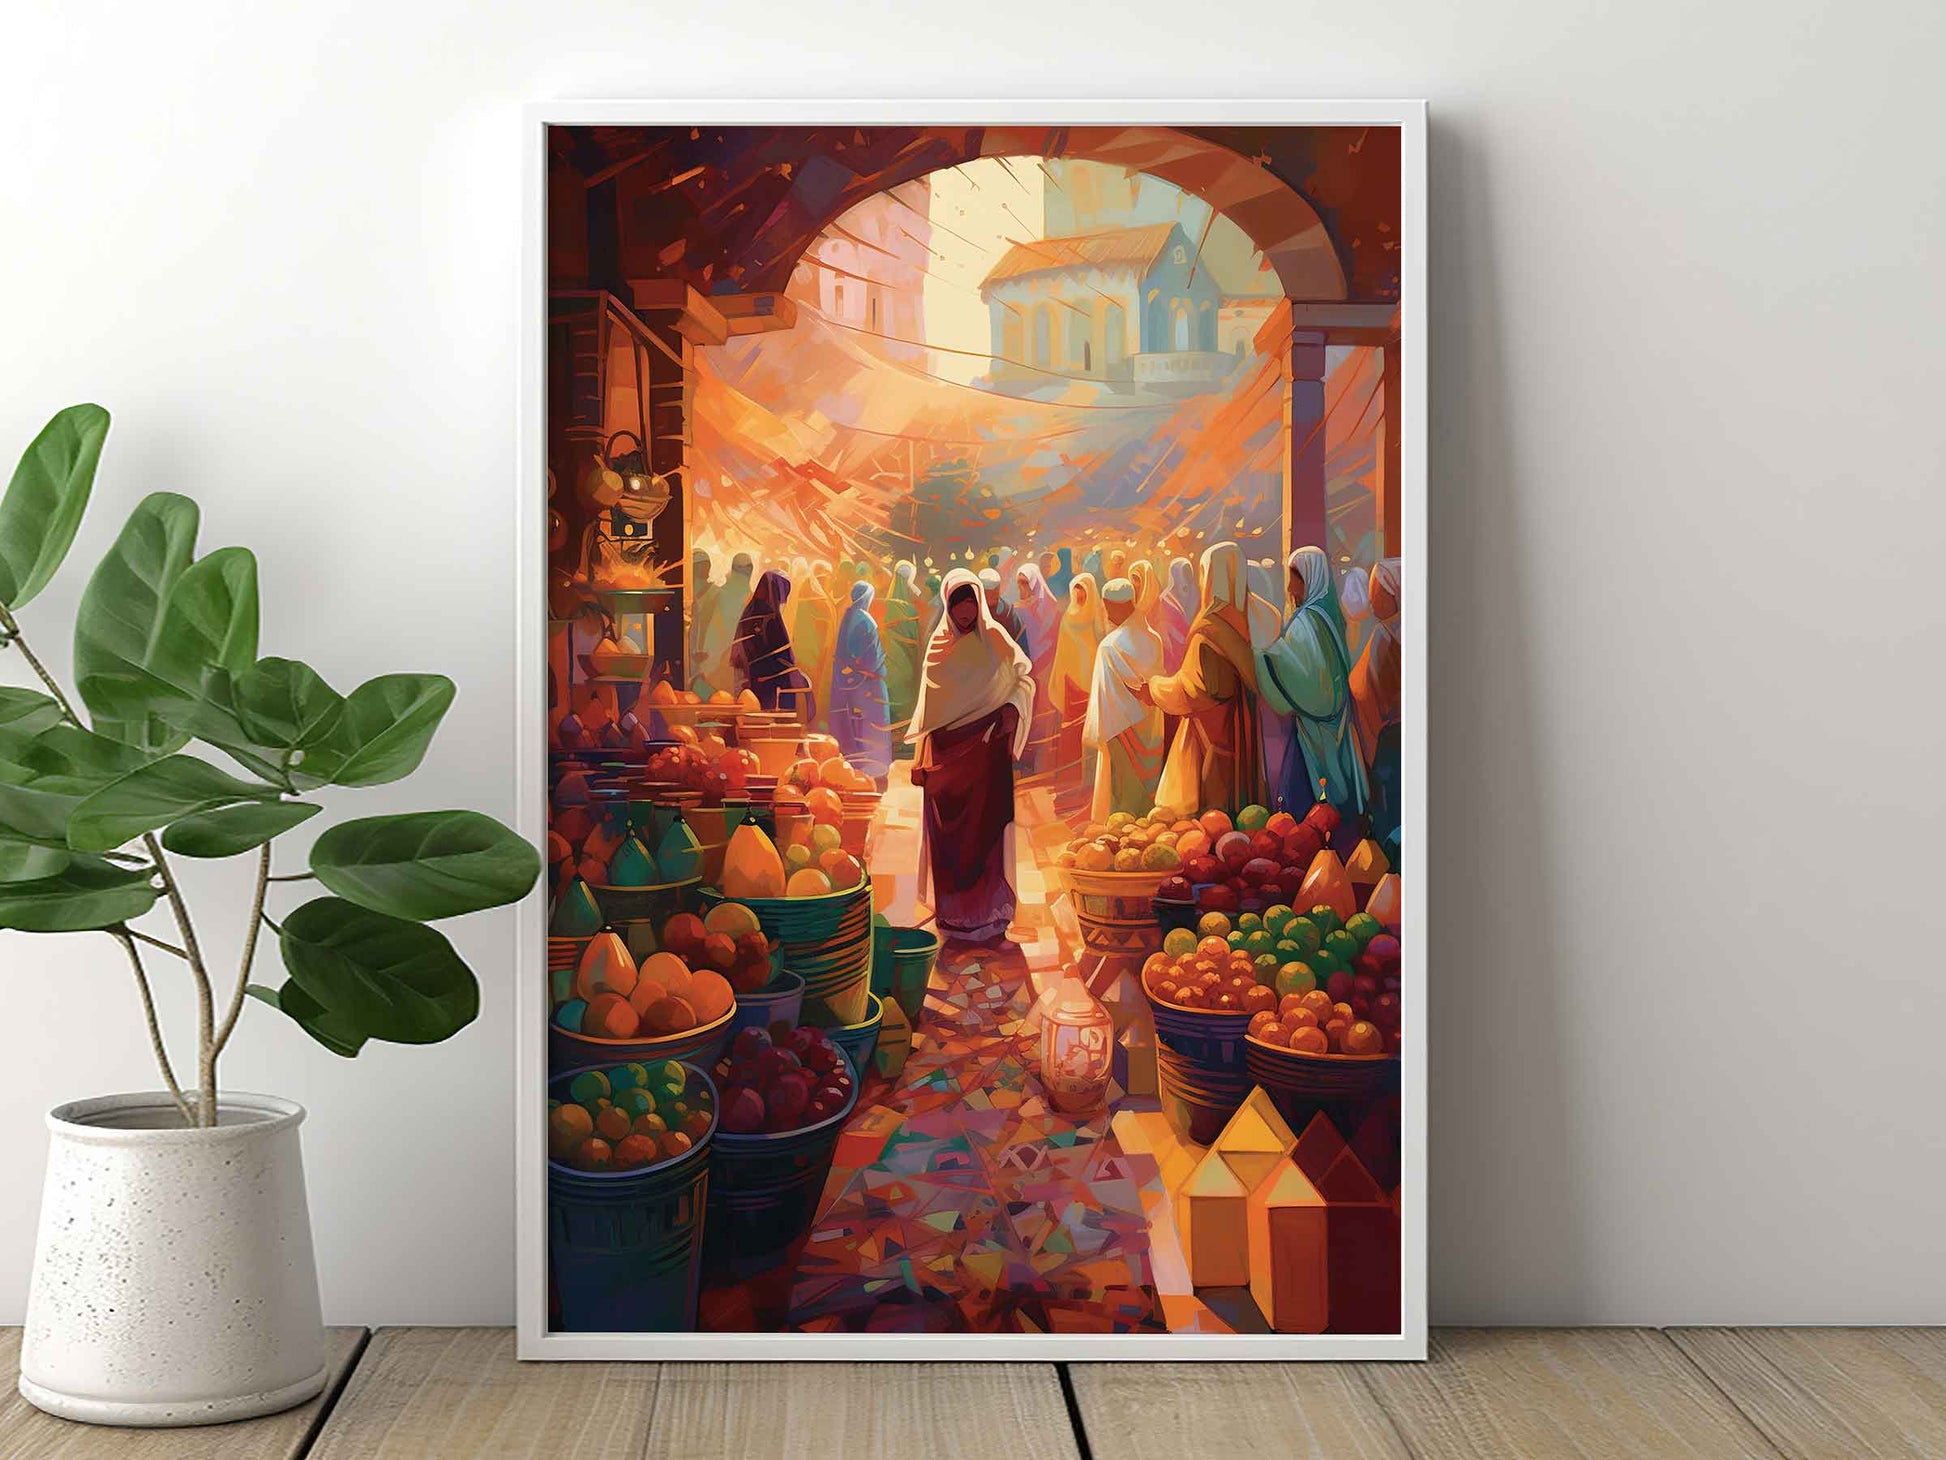 Framed Image of Moroccan Street Markets Abstract Colourful African Wall Art Prints